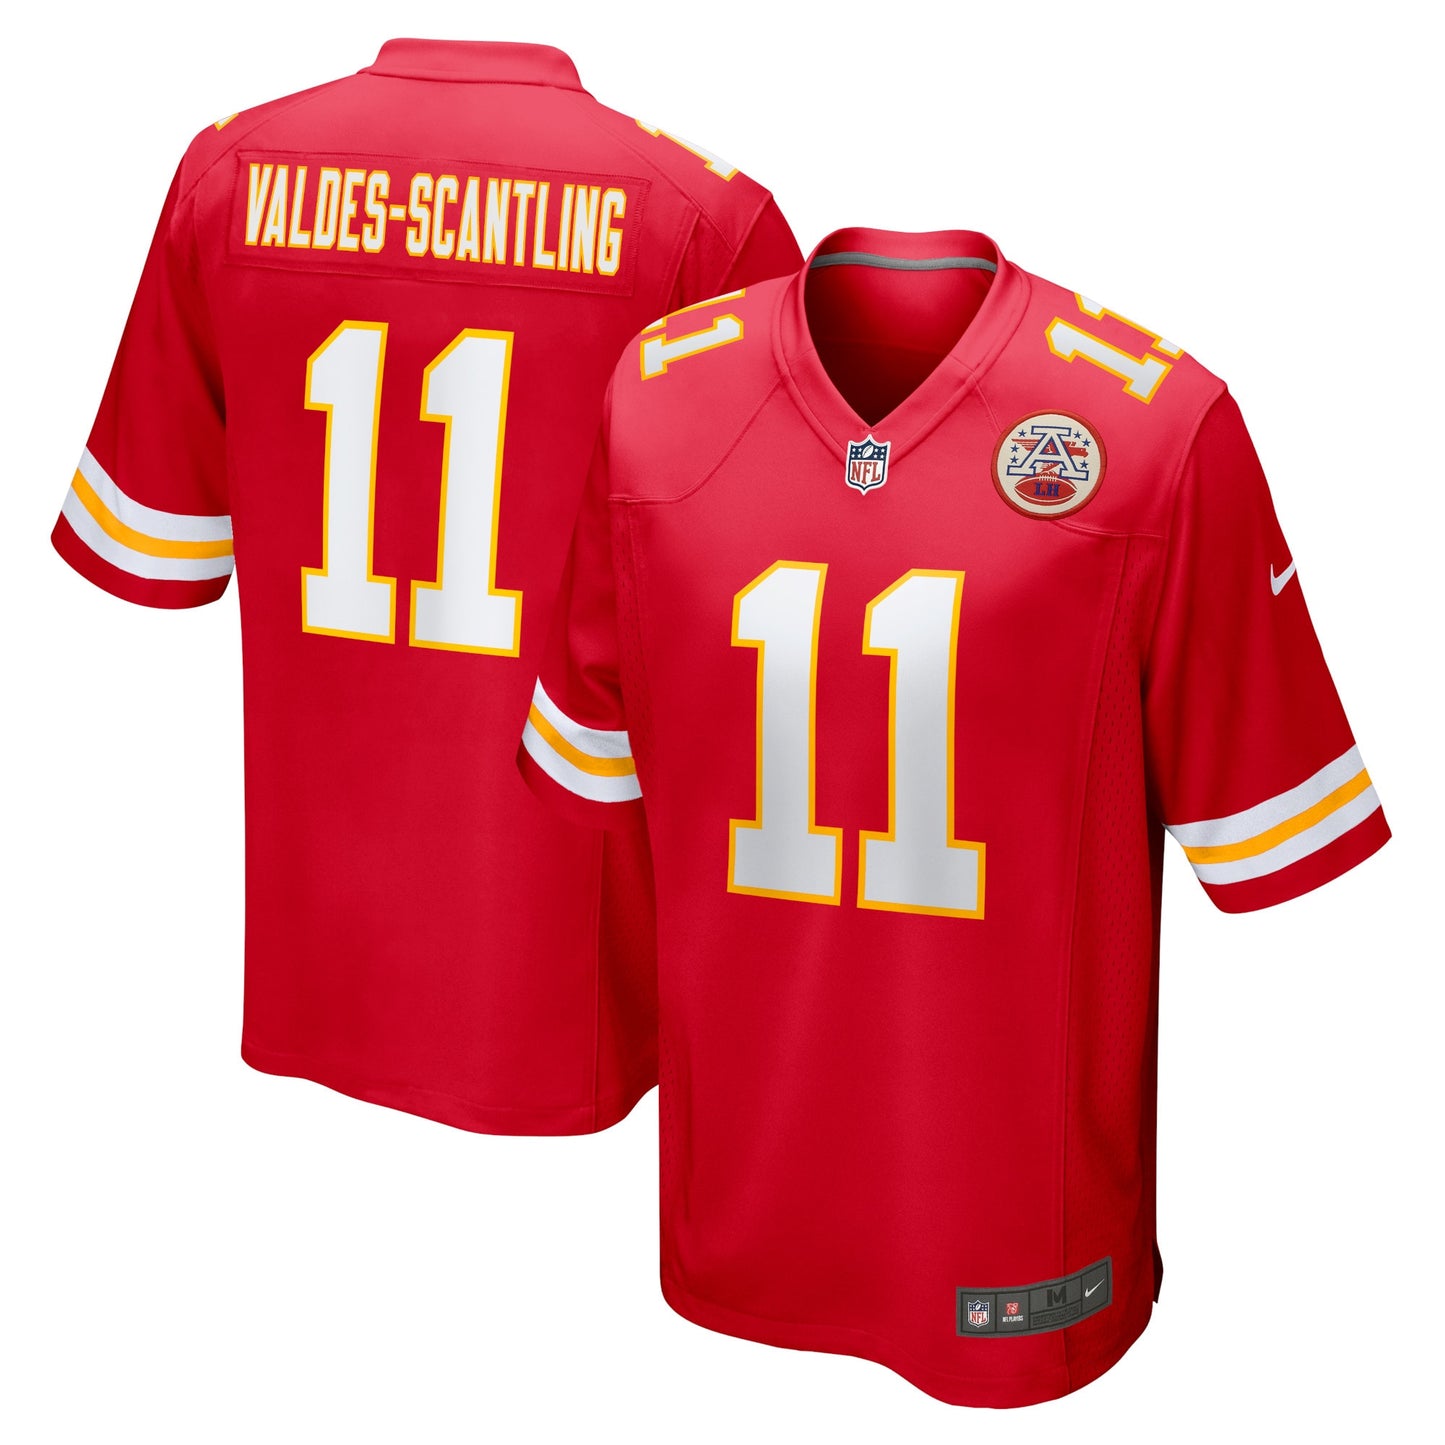 Marquez Valdes-Scantling Kansas City Chiefs Nike Game Jersey - Red